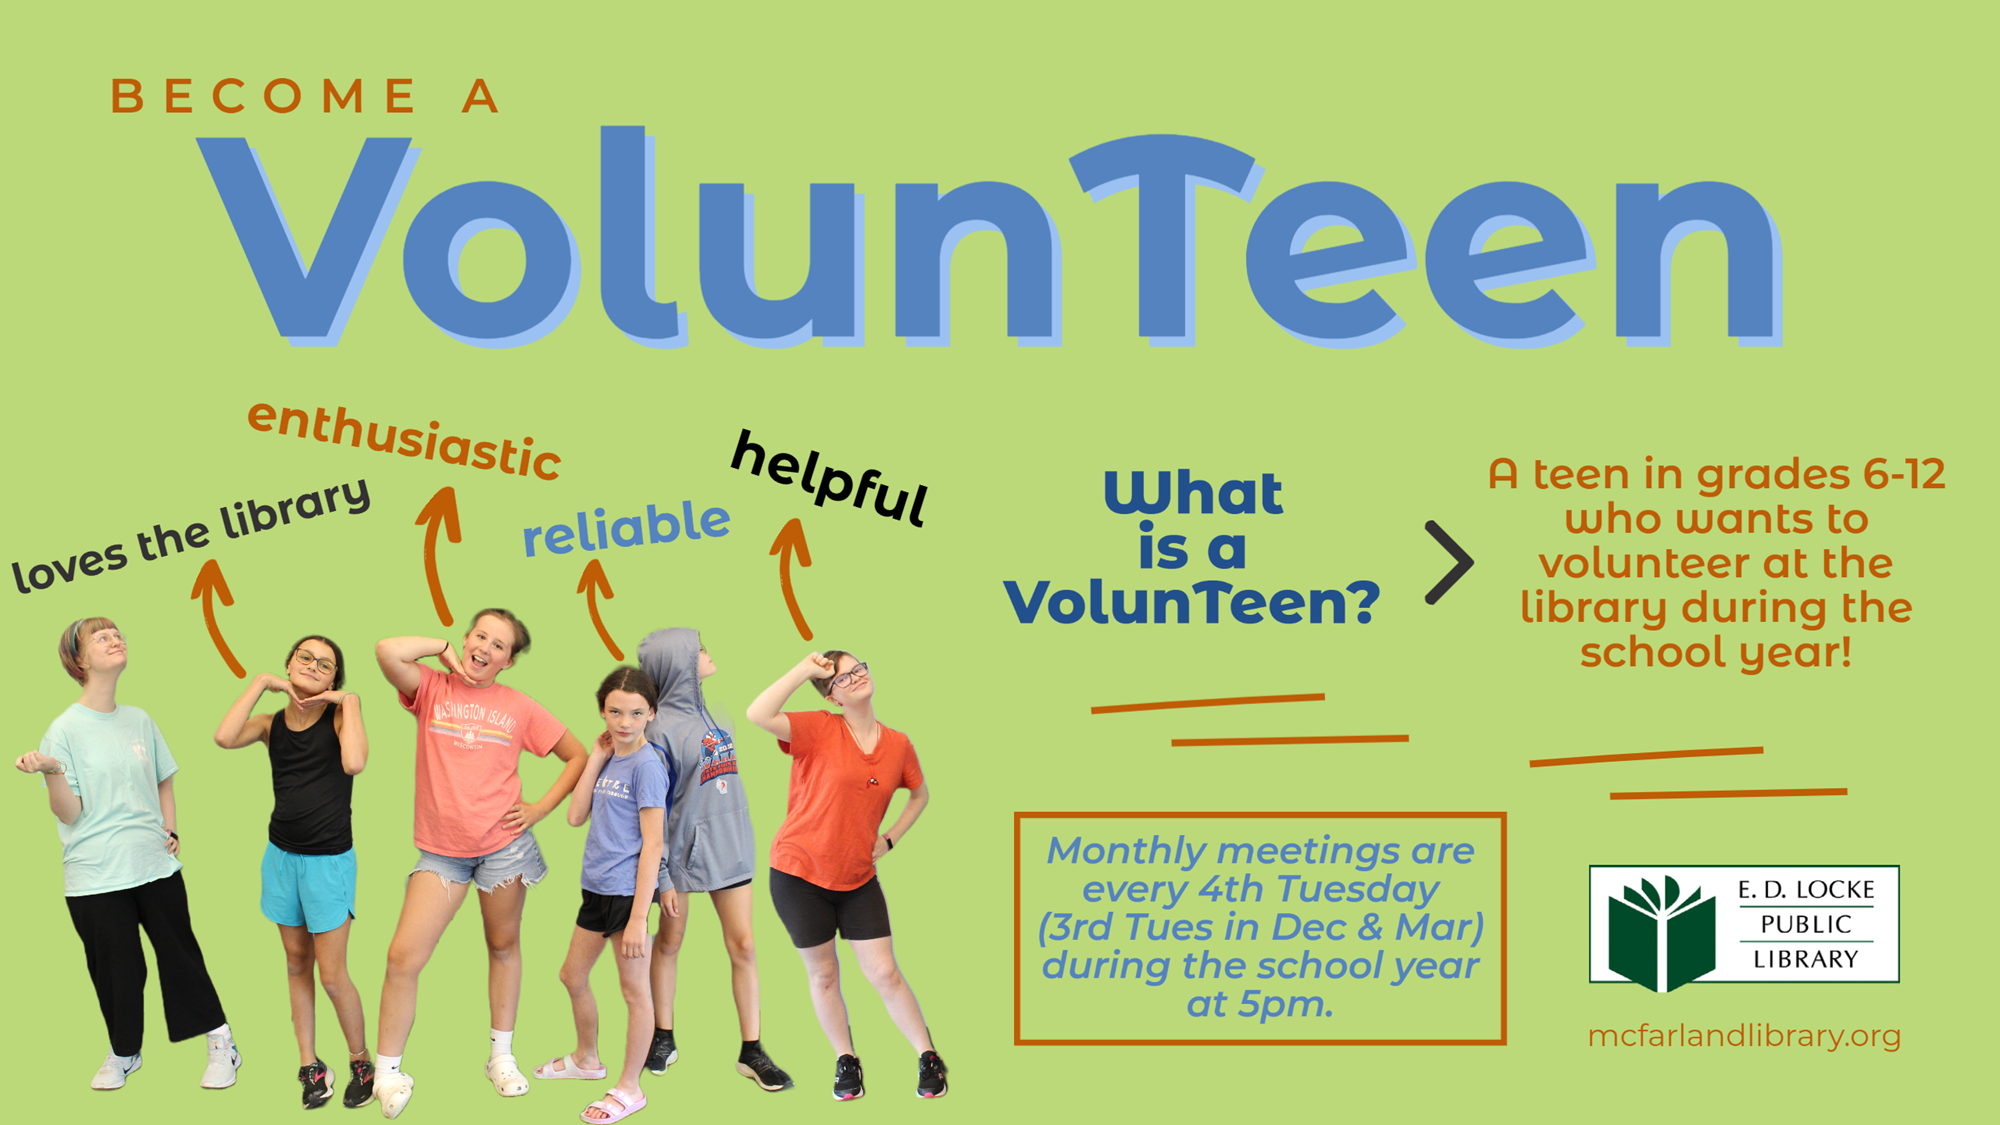 Become a VolunTeen. Image of 6 teens striking a pose. 